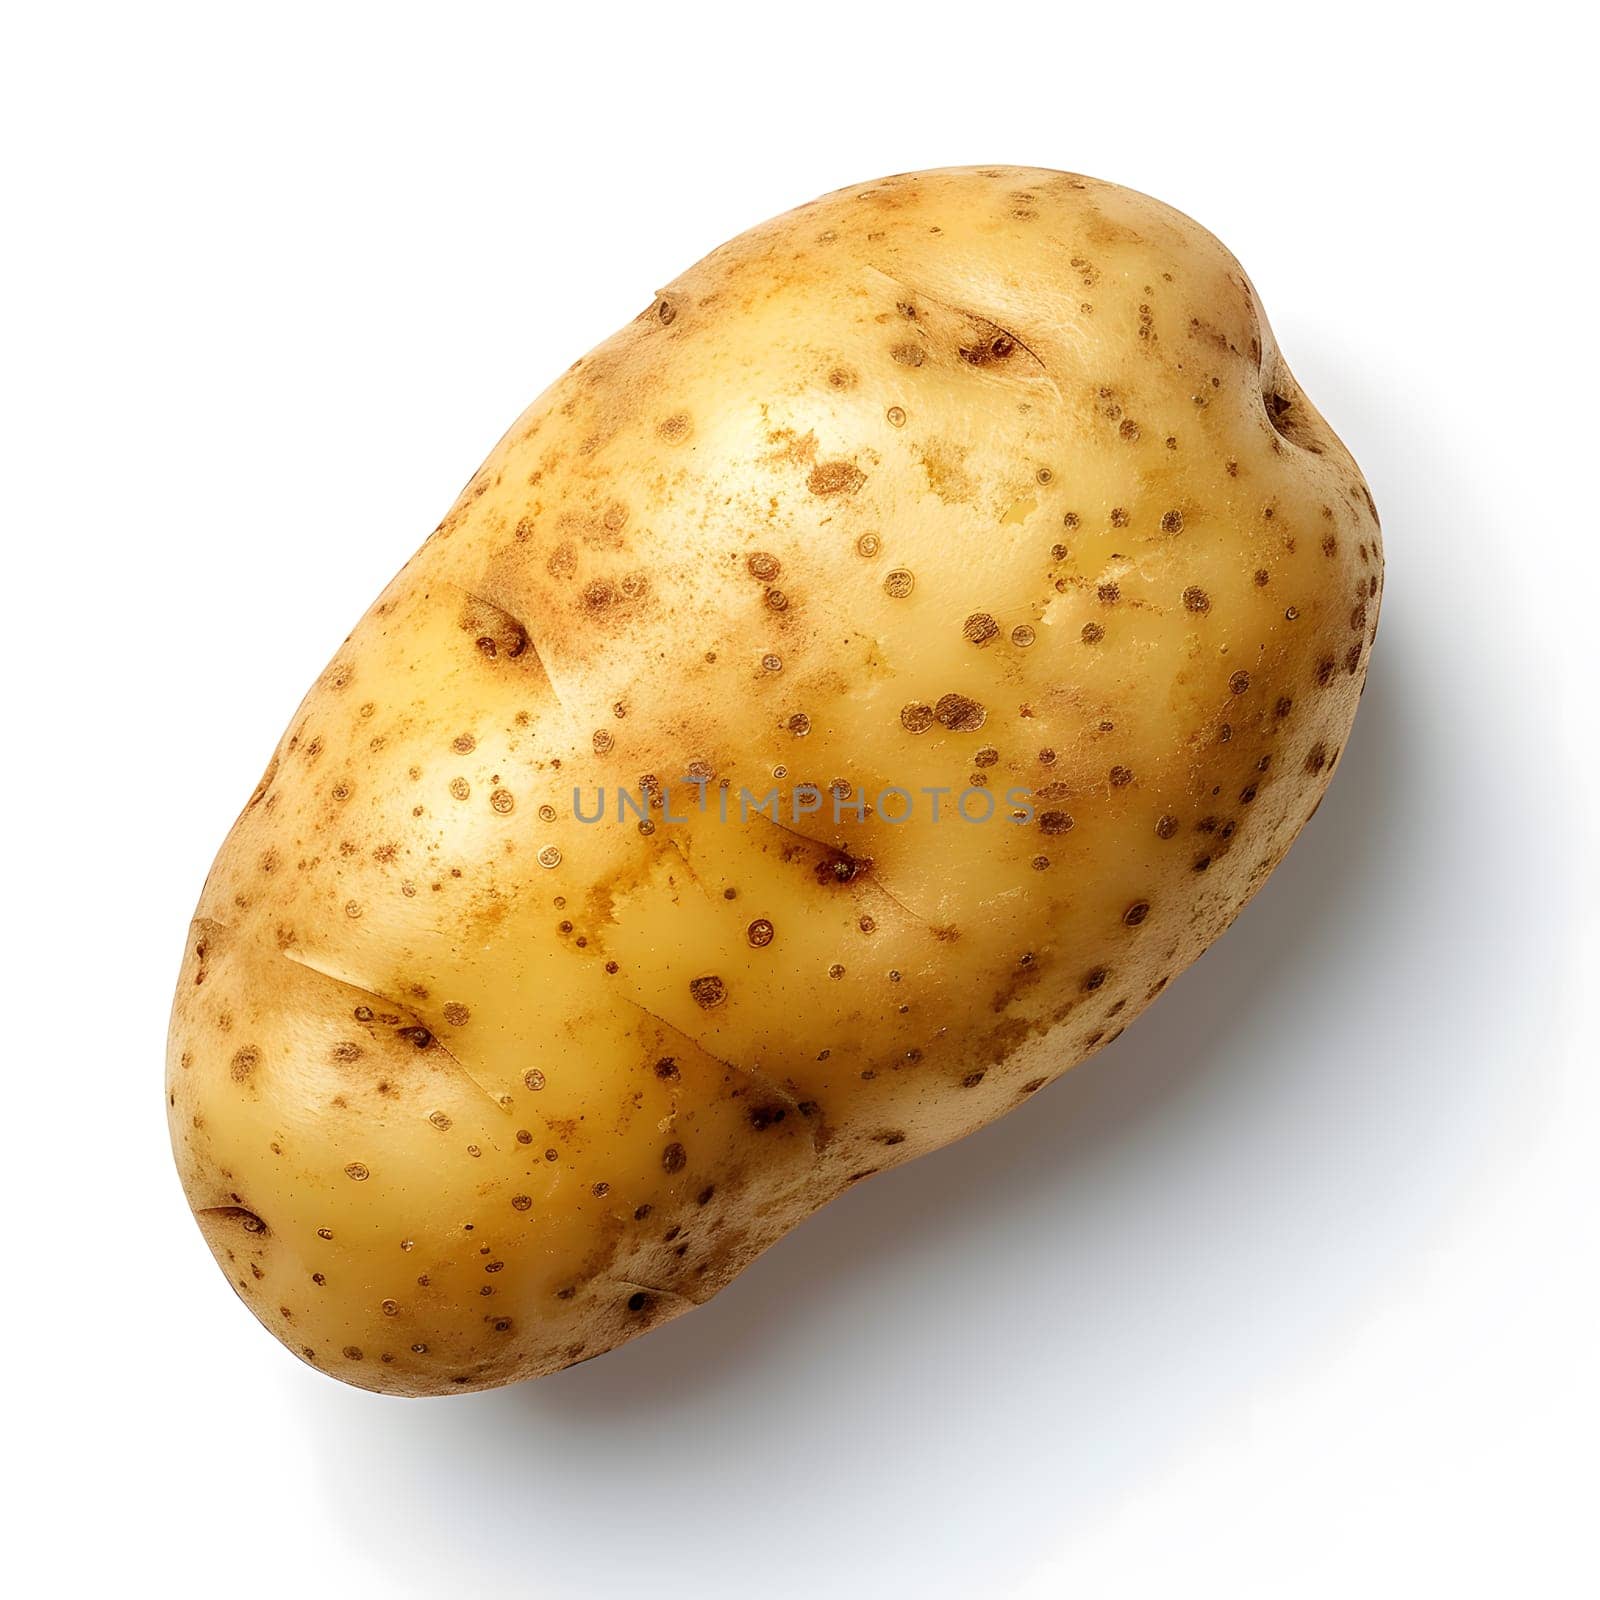 A Yukon gold potato, a type of root vegetable, with brown spots on a white background. Potatoes are a staple food and versatile ingredient in many cuisines